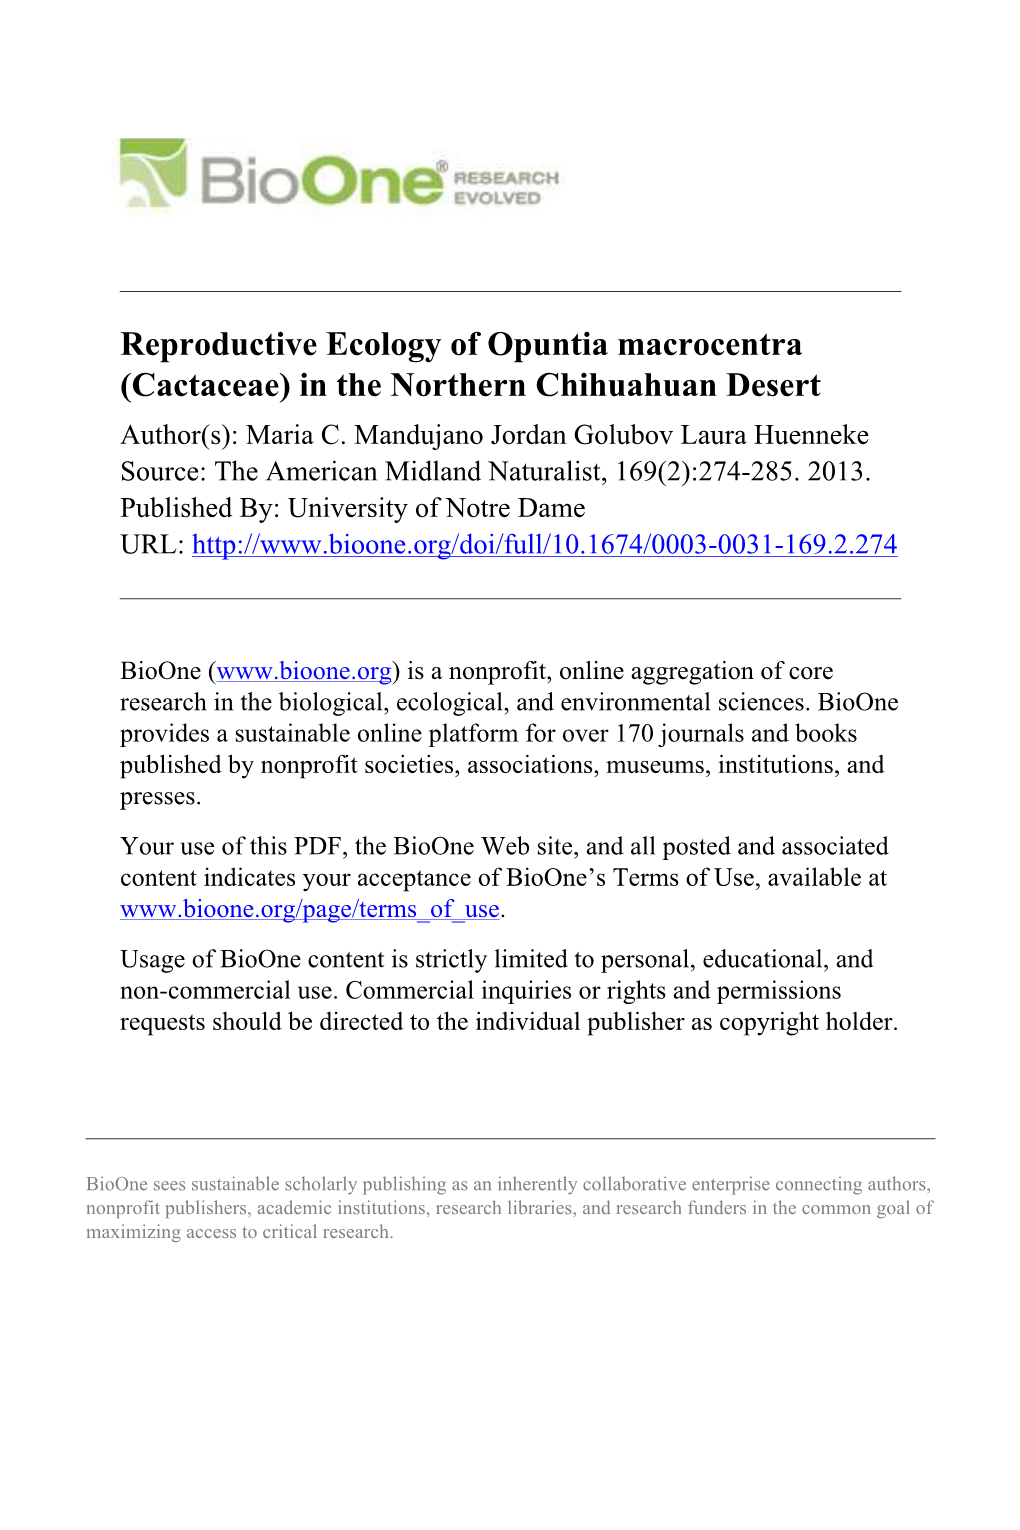 Reproductive Ecology of Opuntia Macrocentra (Cactaceae) in the Northern Chihuahuan Desert Author(S): Maria C